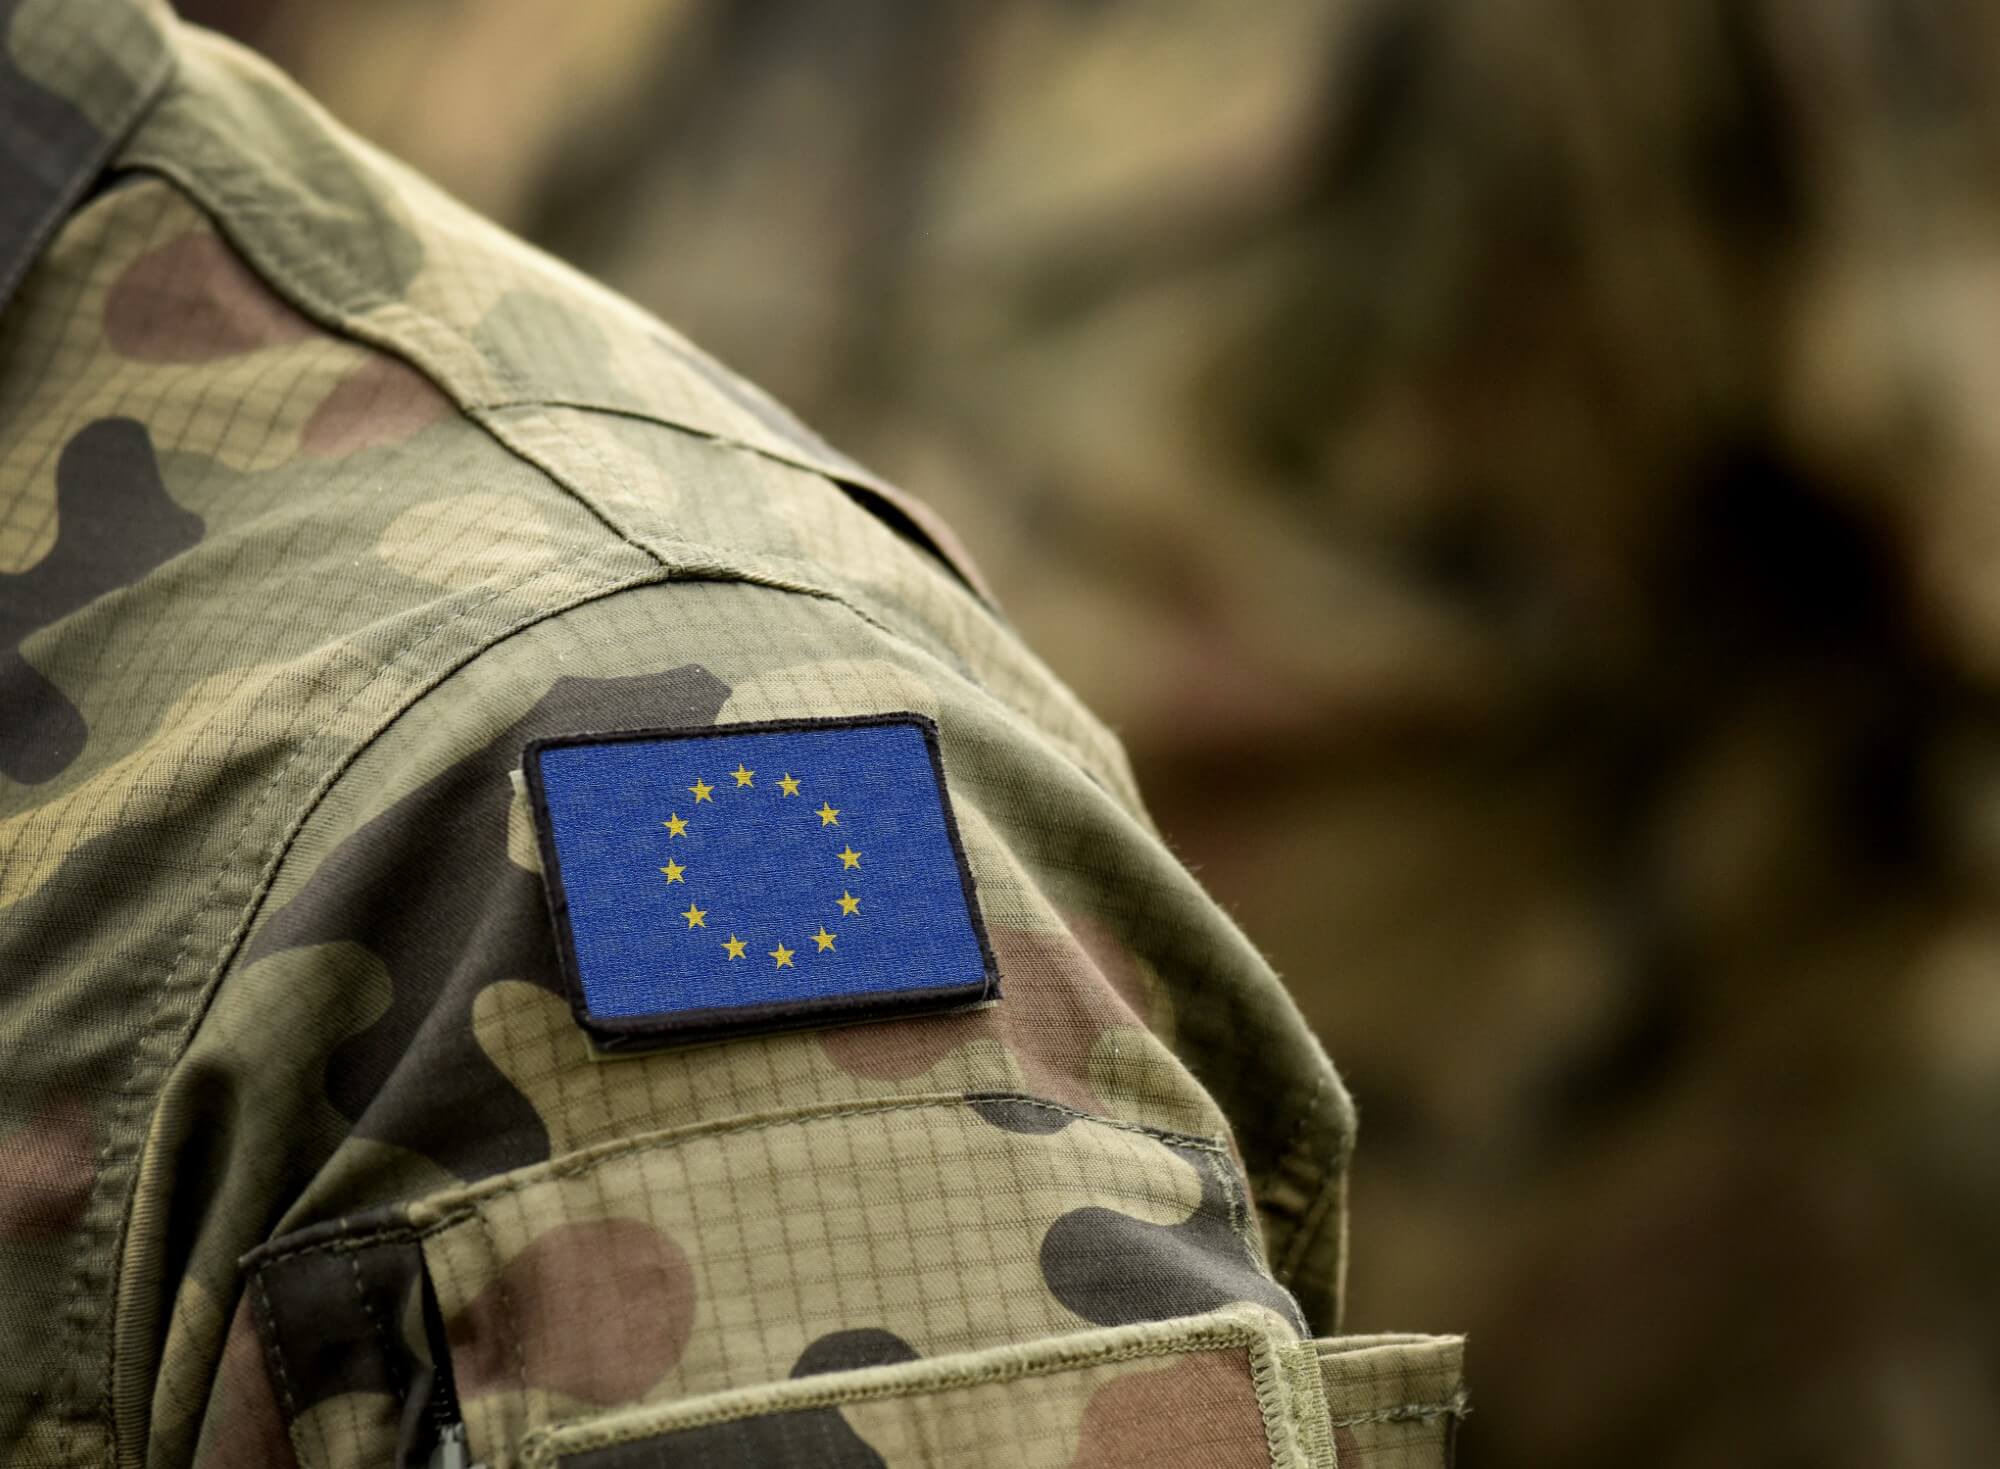 Close-up of a military uniform shoulder with a patch of the European Union flag, representing EU military forces or personnel